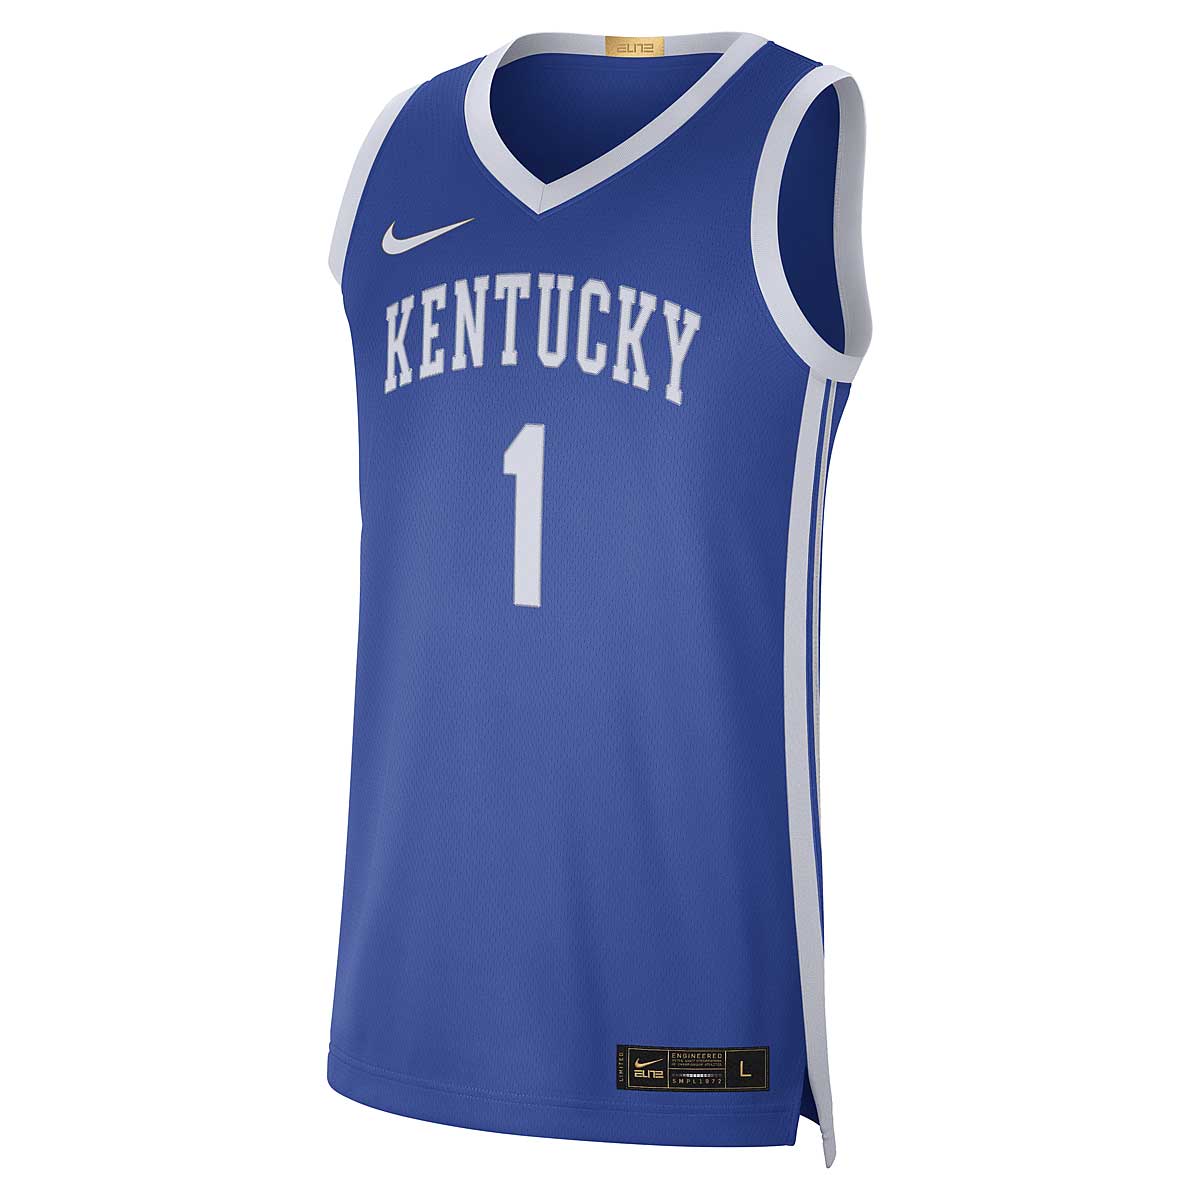 Nike Ncaa Kentucky Wildcats Dri-fit Limited Edition Jersey Devin Booker, Game Royal S